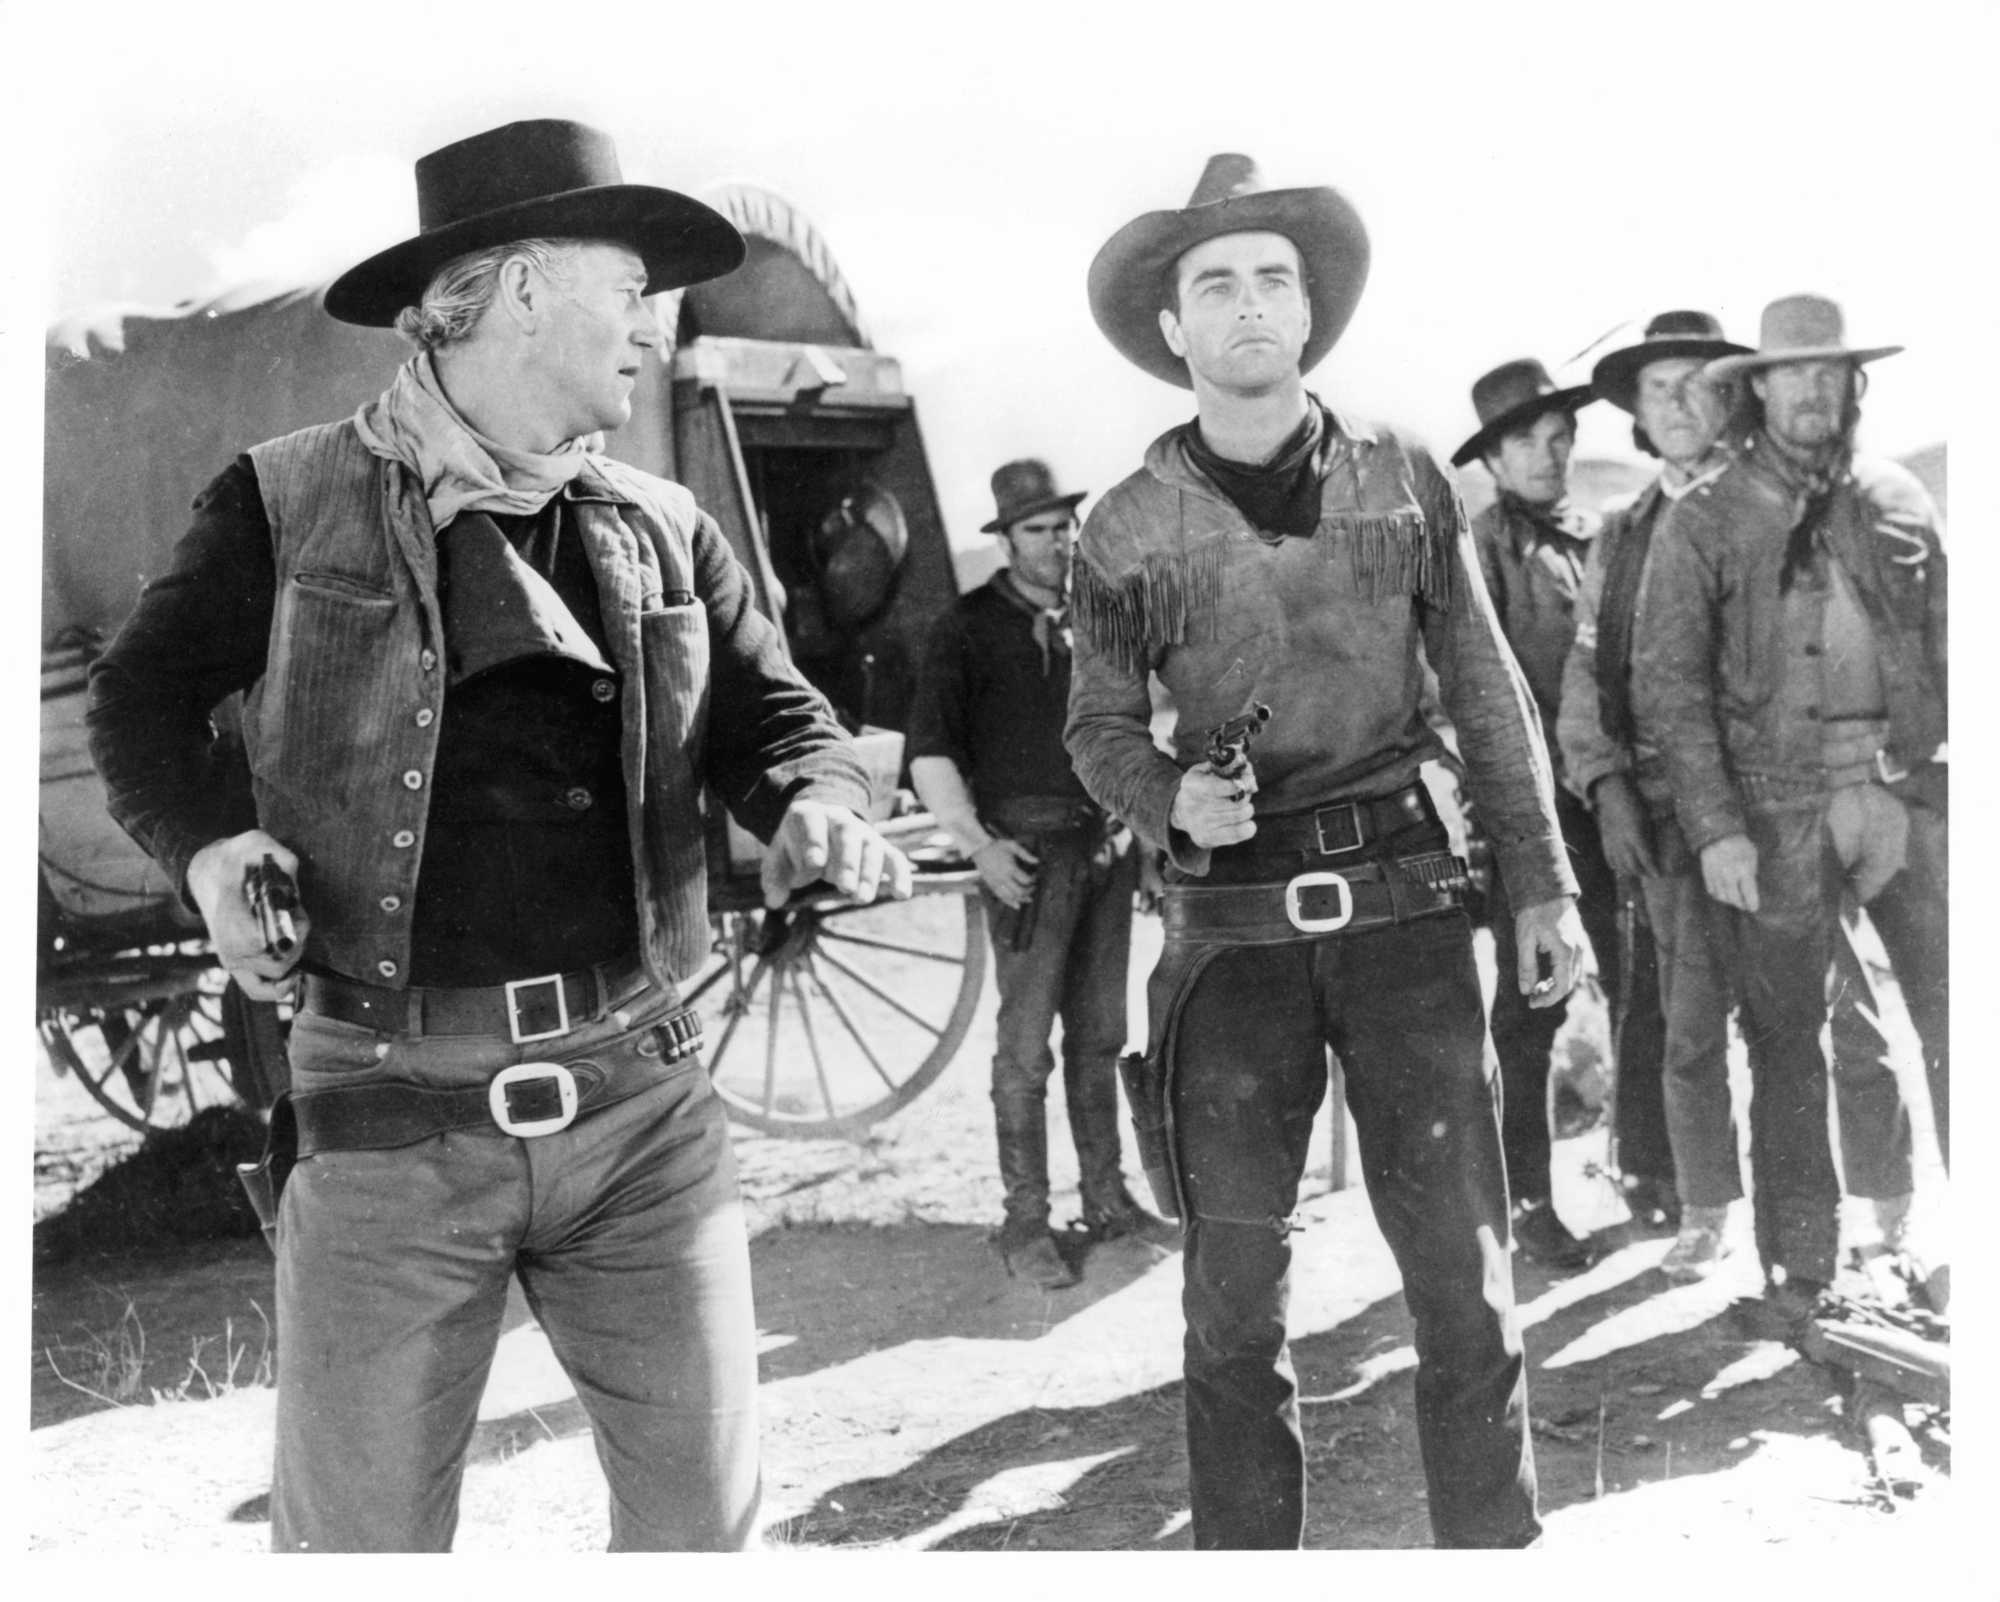 'Red River' John Wayne as Thomas Dunson and Montgomery Clift as Matt Garth. Dunson is looking at Garth, who is holding his pistol out.